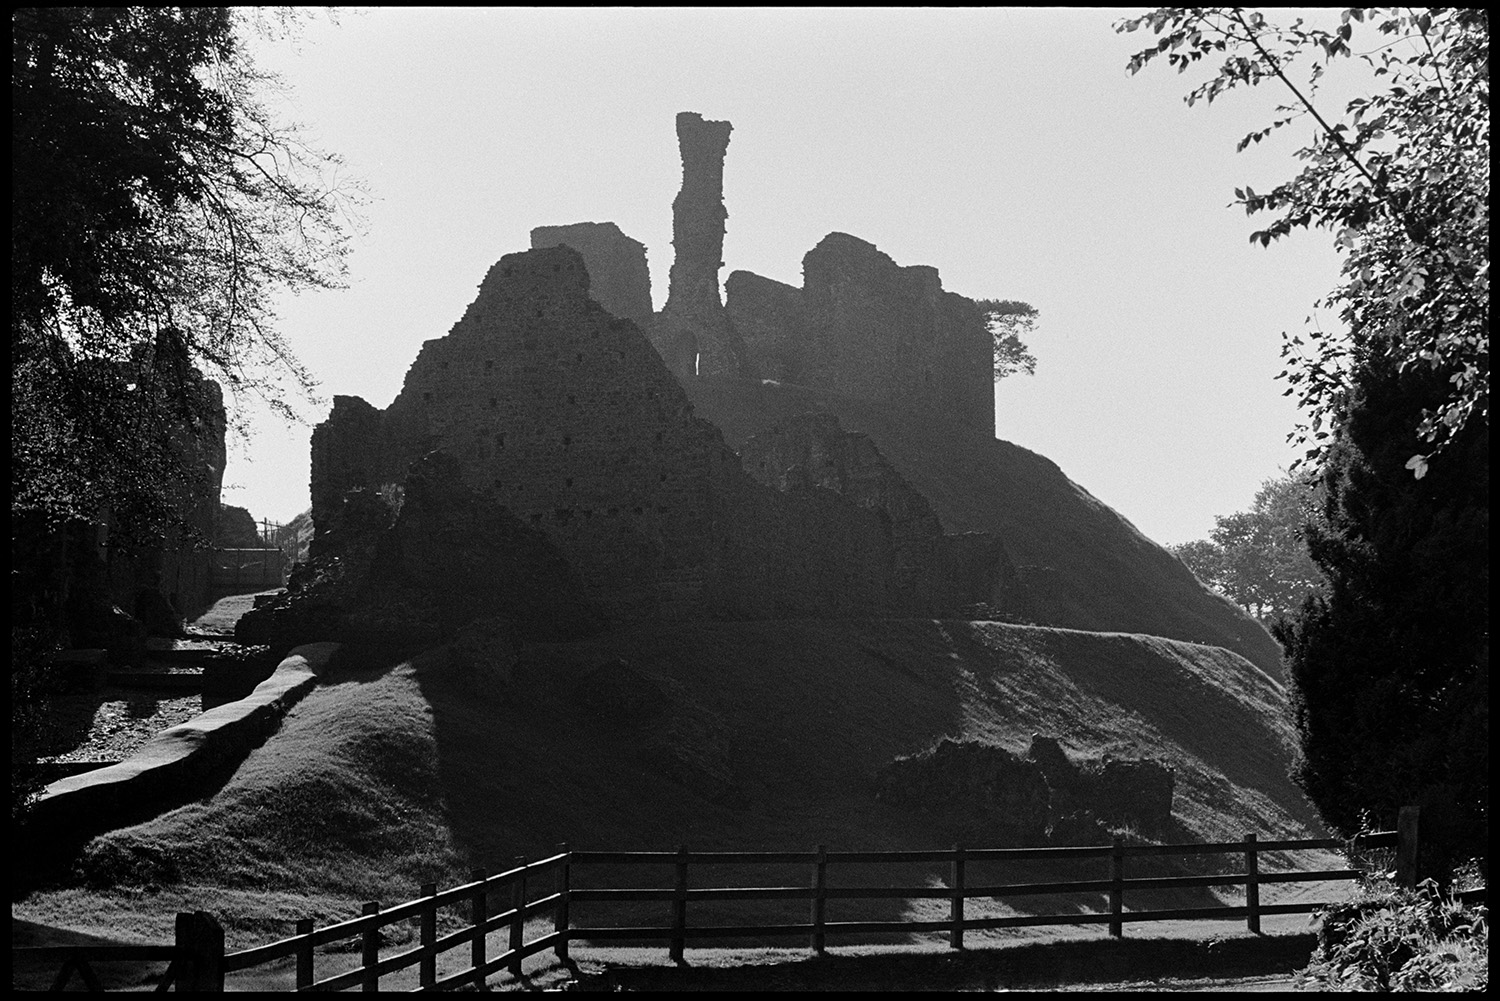 Ruined castle on mound. 
[The ruins of Okehampton Castle silhouetted against the sun. A modern wooden fence can be seen around the ruins.]